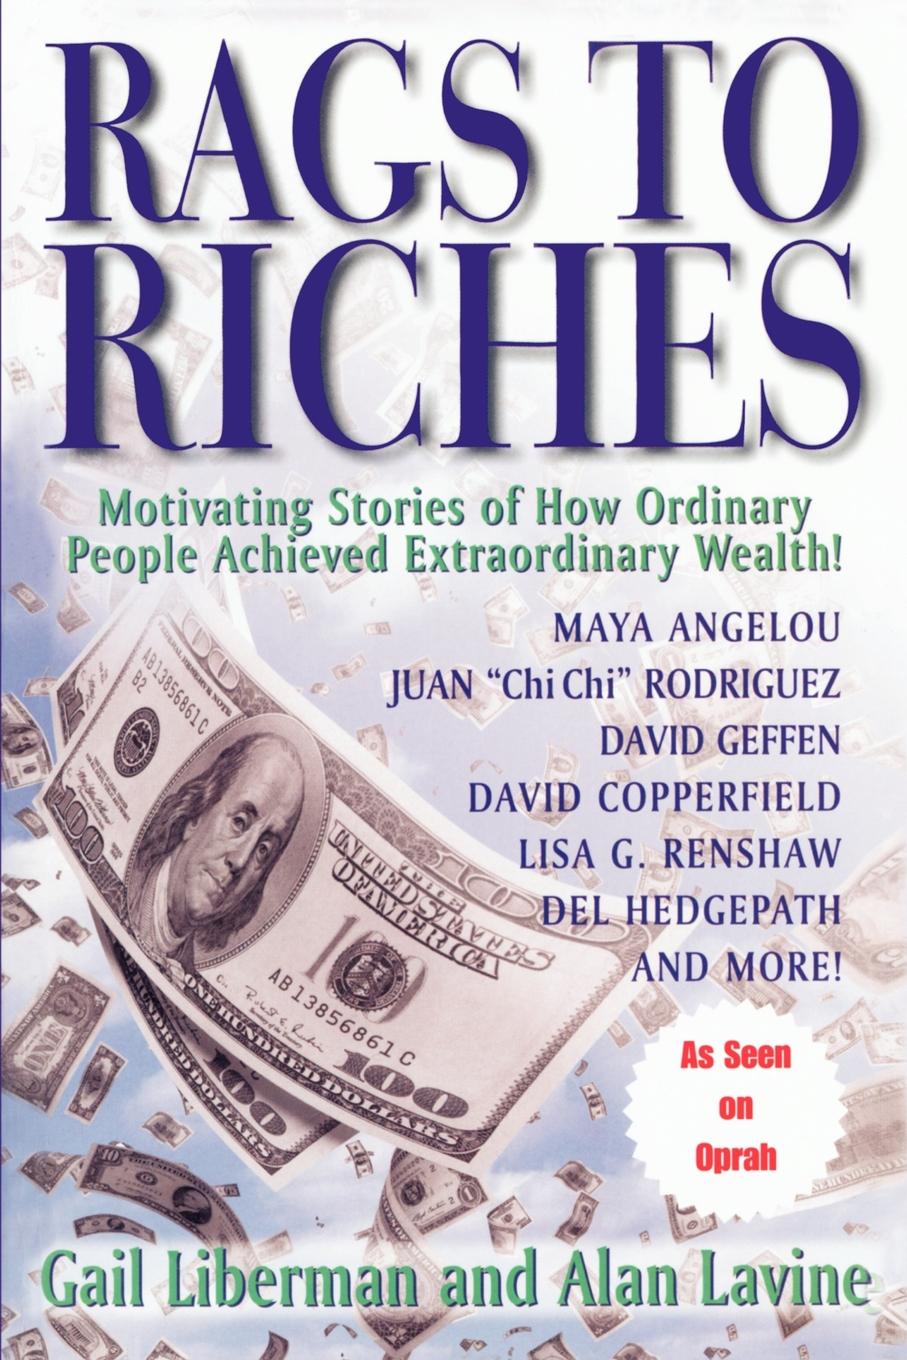 Rags To Riches. Motivating Stories of How Ordinary People Achieved Extraordinary Wealth